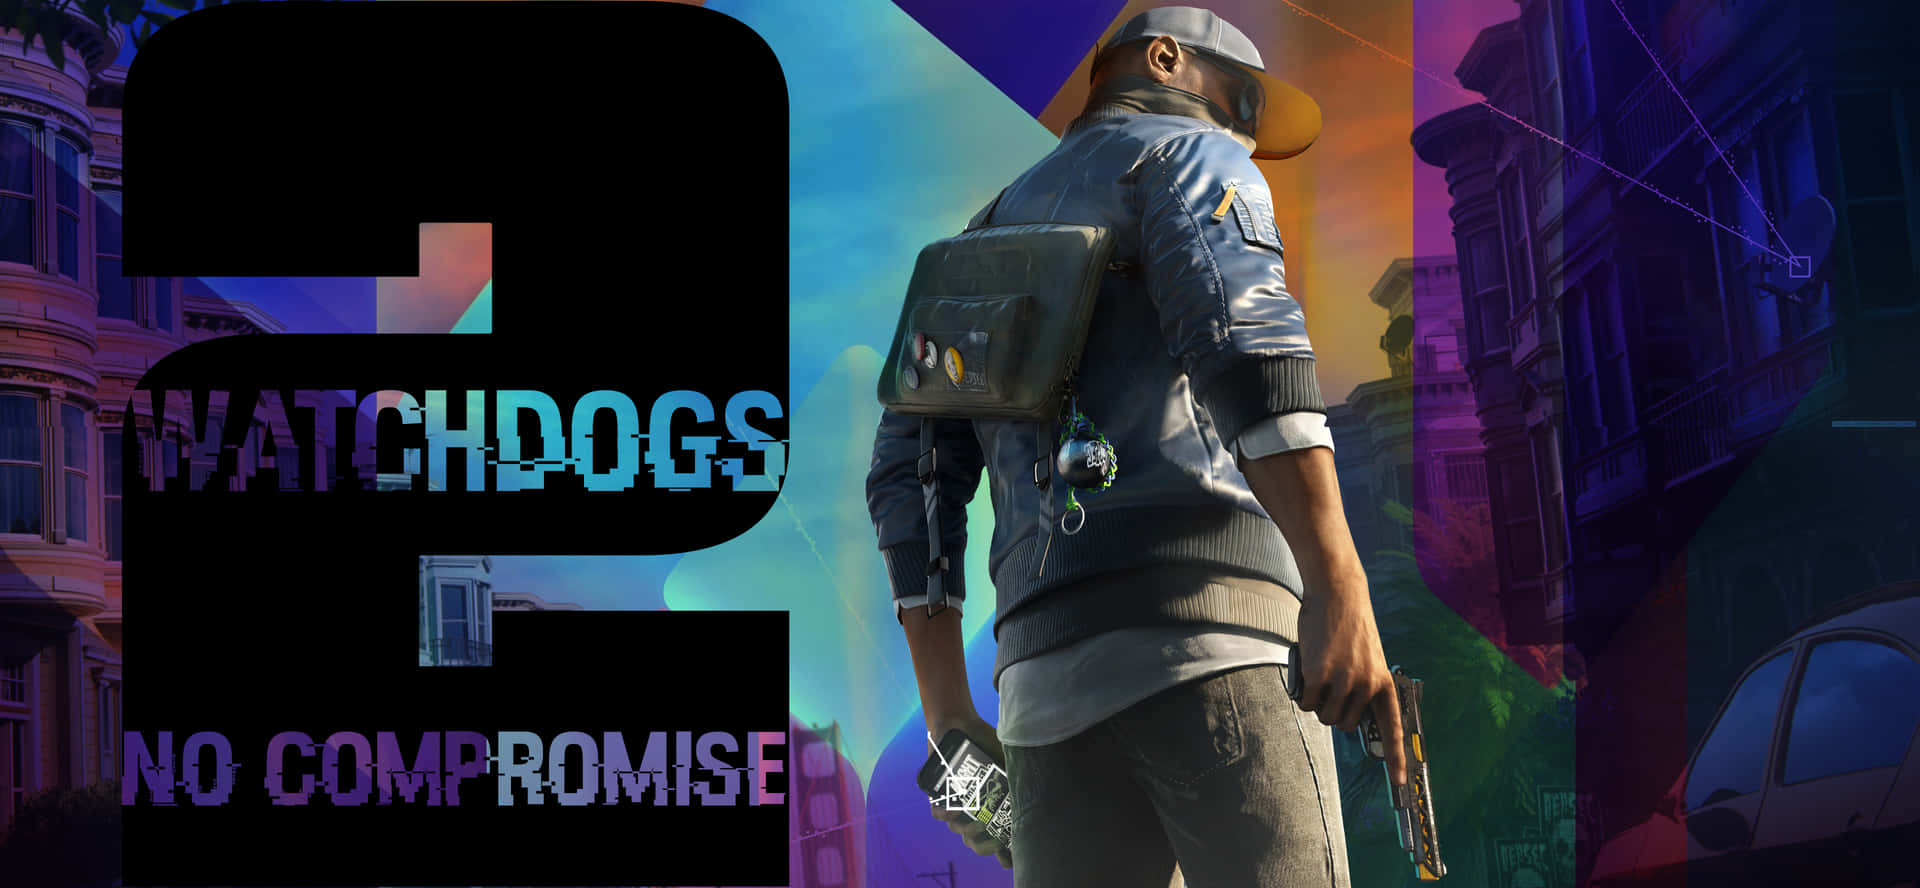 High Definition Grand Theft Auto-style gaming with Watch Dogs 2 4K Wallpaper